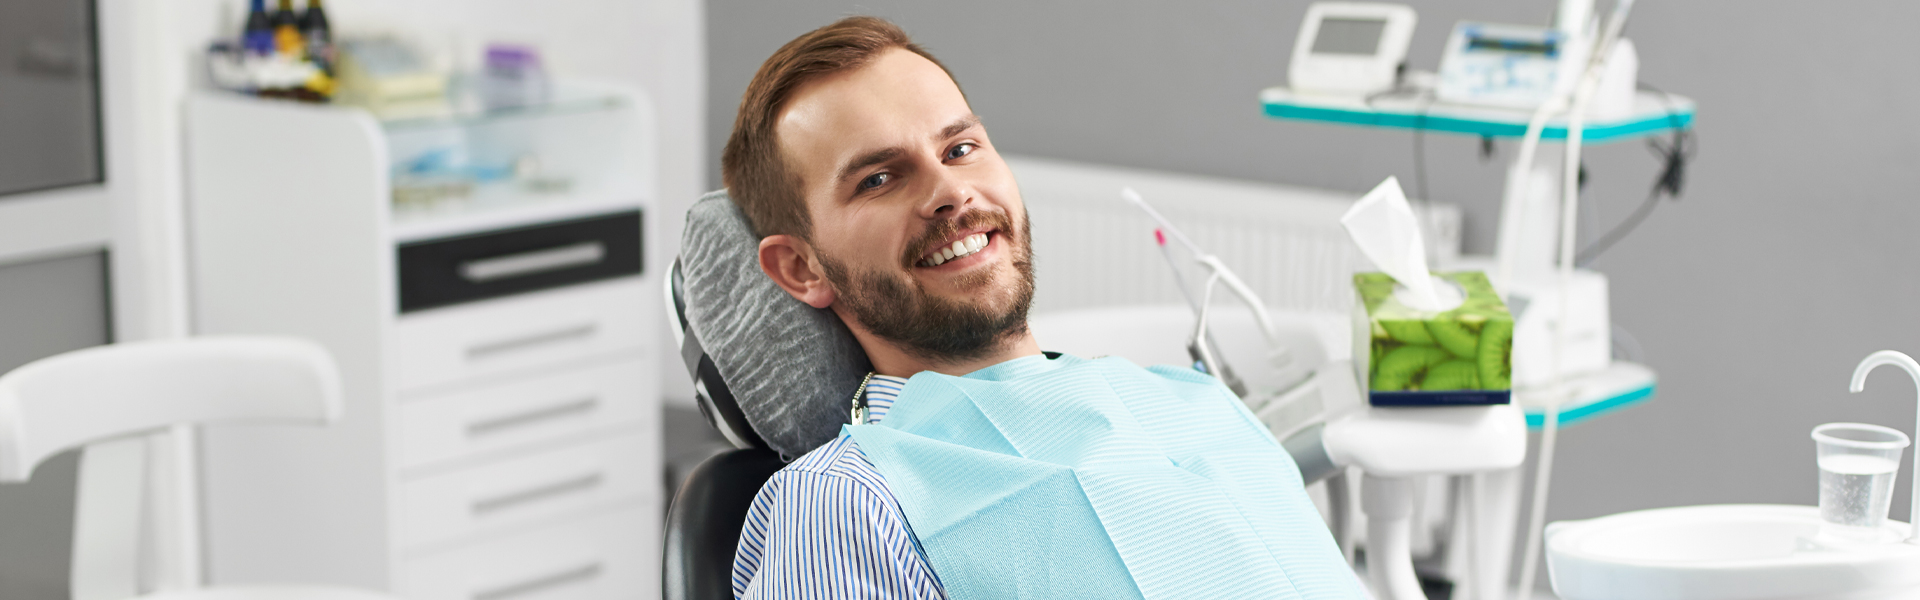 Restorative Dentistry Can Help You Revamp Your Smile